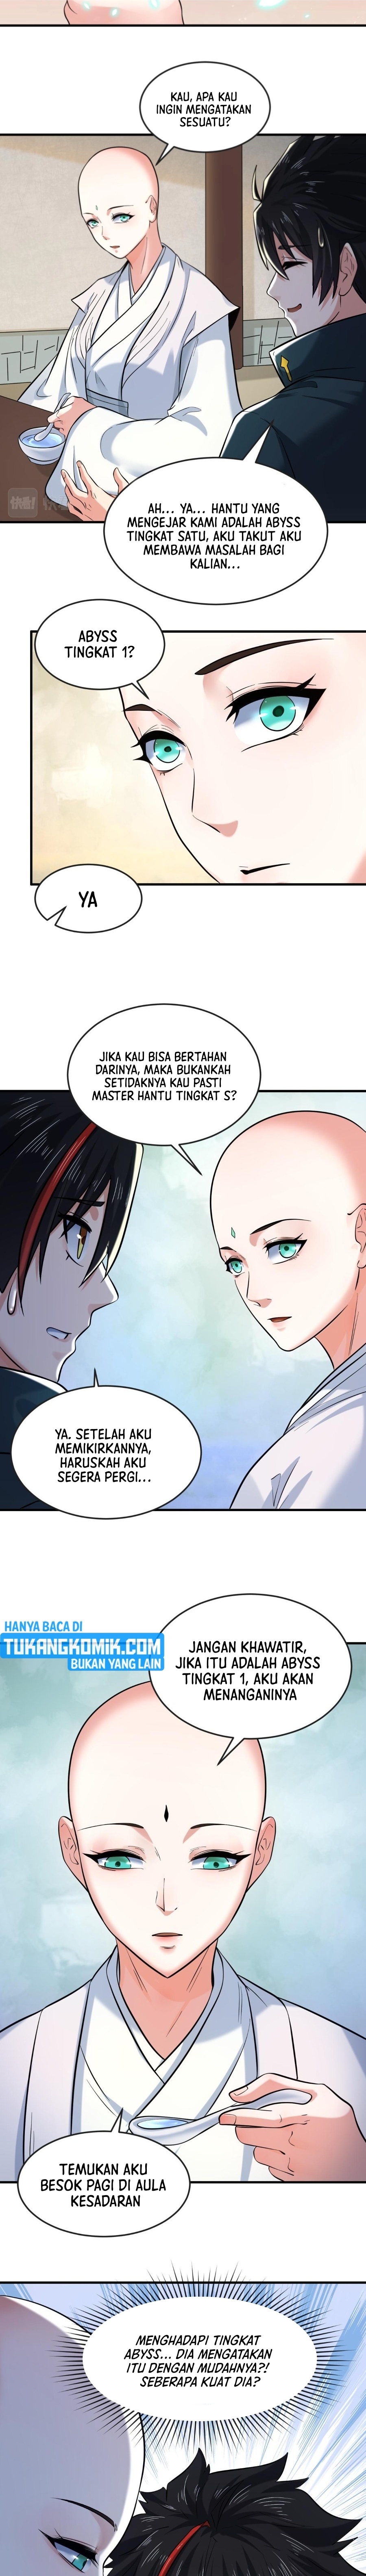 age-of-terror Chapter 44